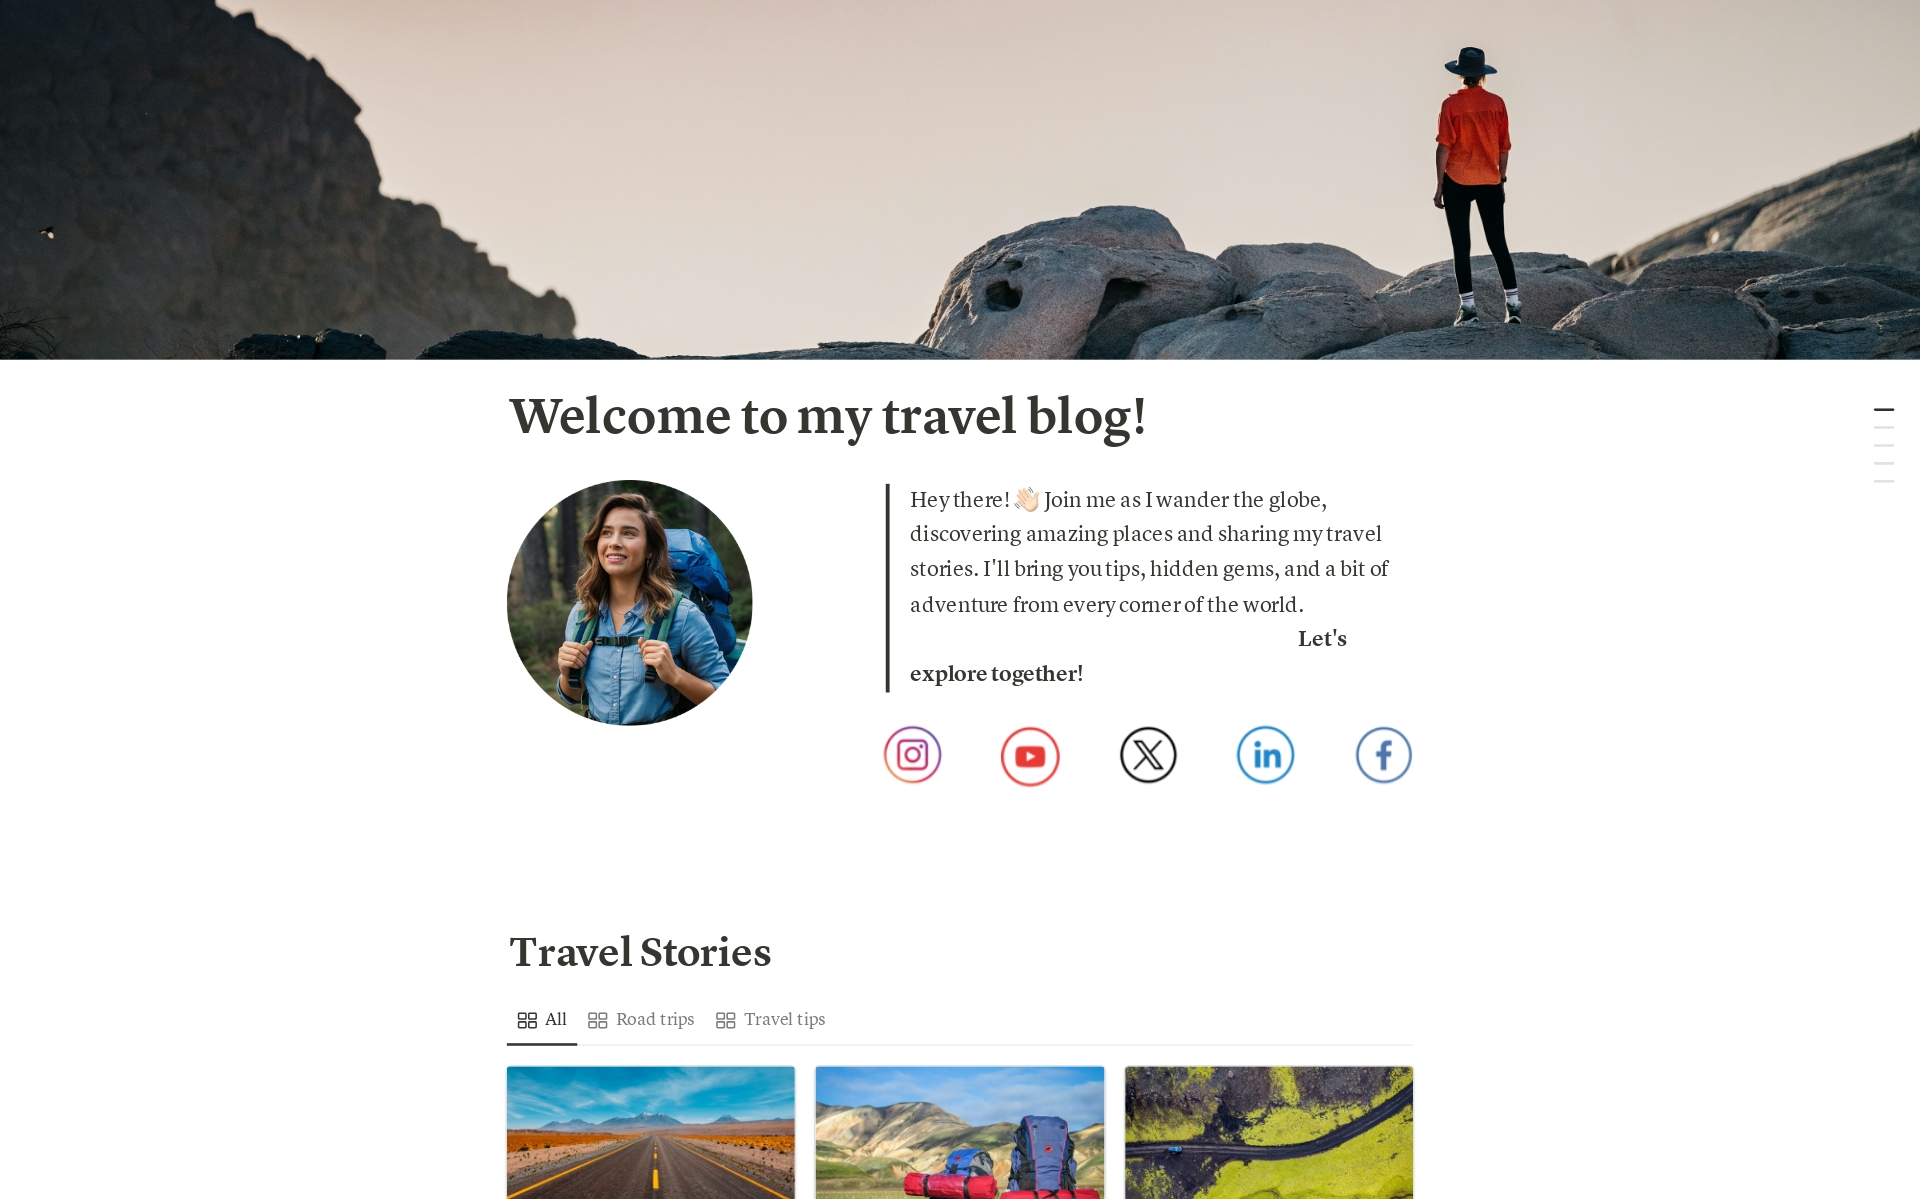 Share your travel experiences into captivating stories with this Travel Blog Notion template. Publish stories, itineraries, and travel tips effortlessly, enhanced by interactive maps and photo galleries. Seamlessly integrate social media updates to reach a global audience.